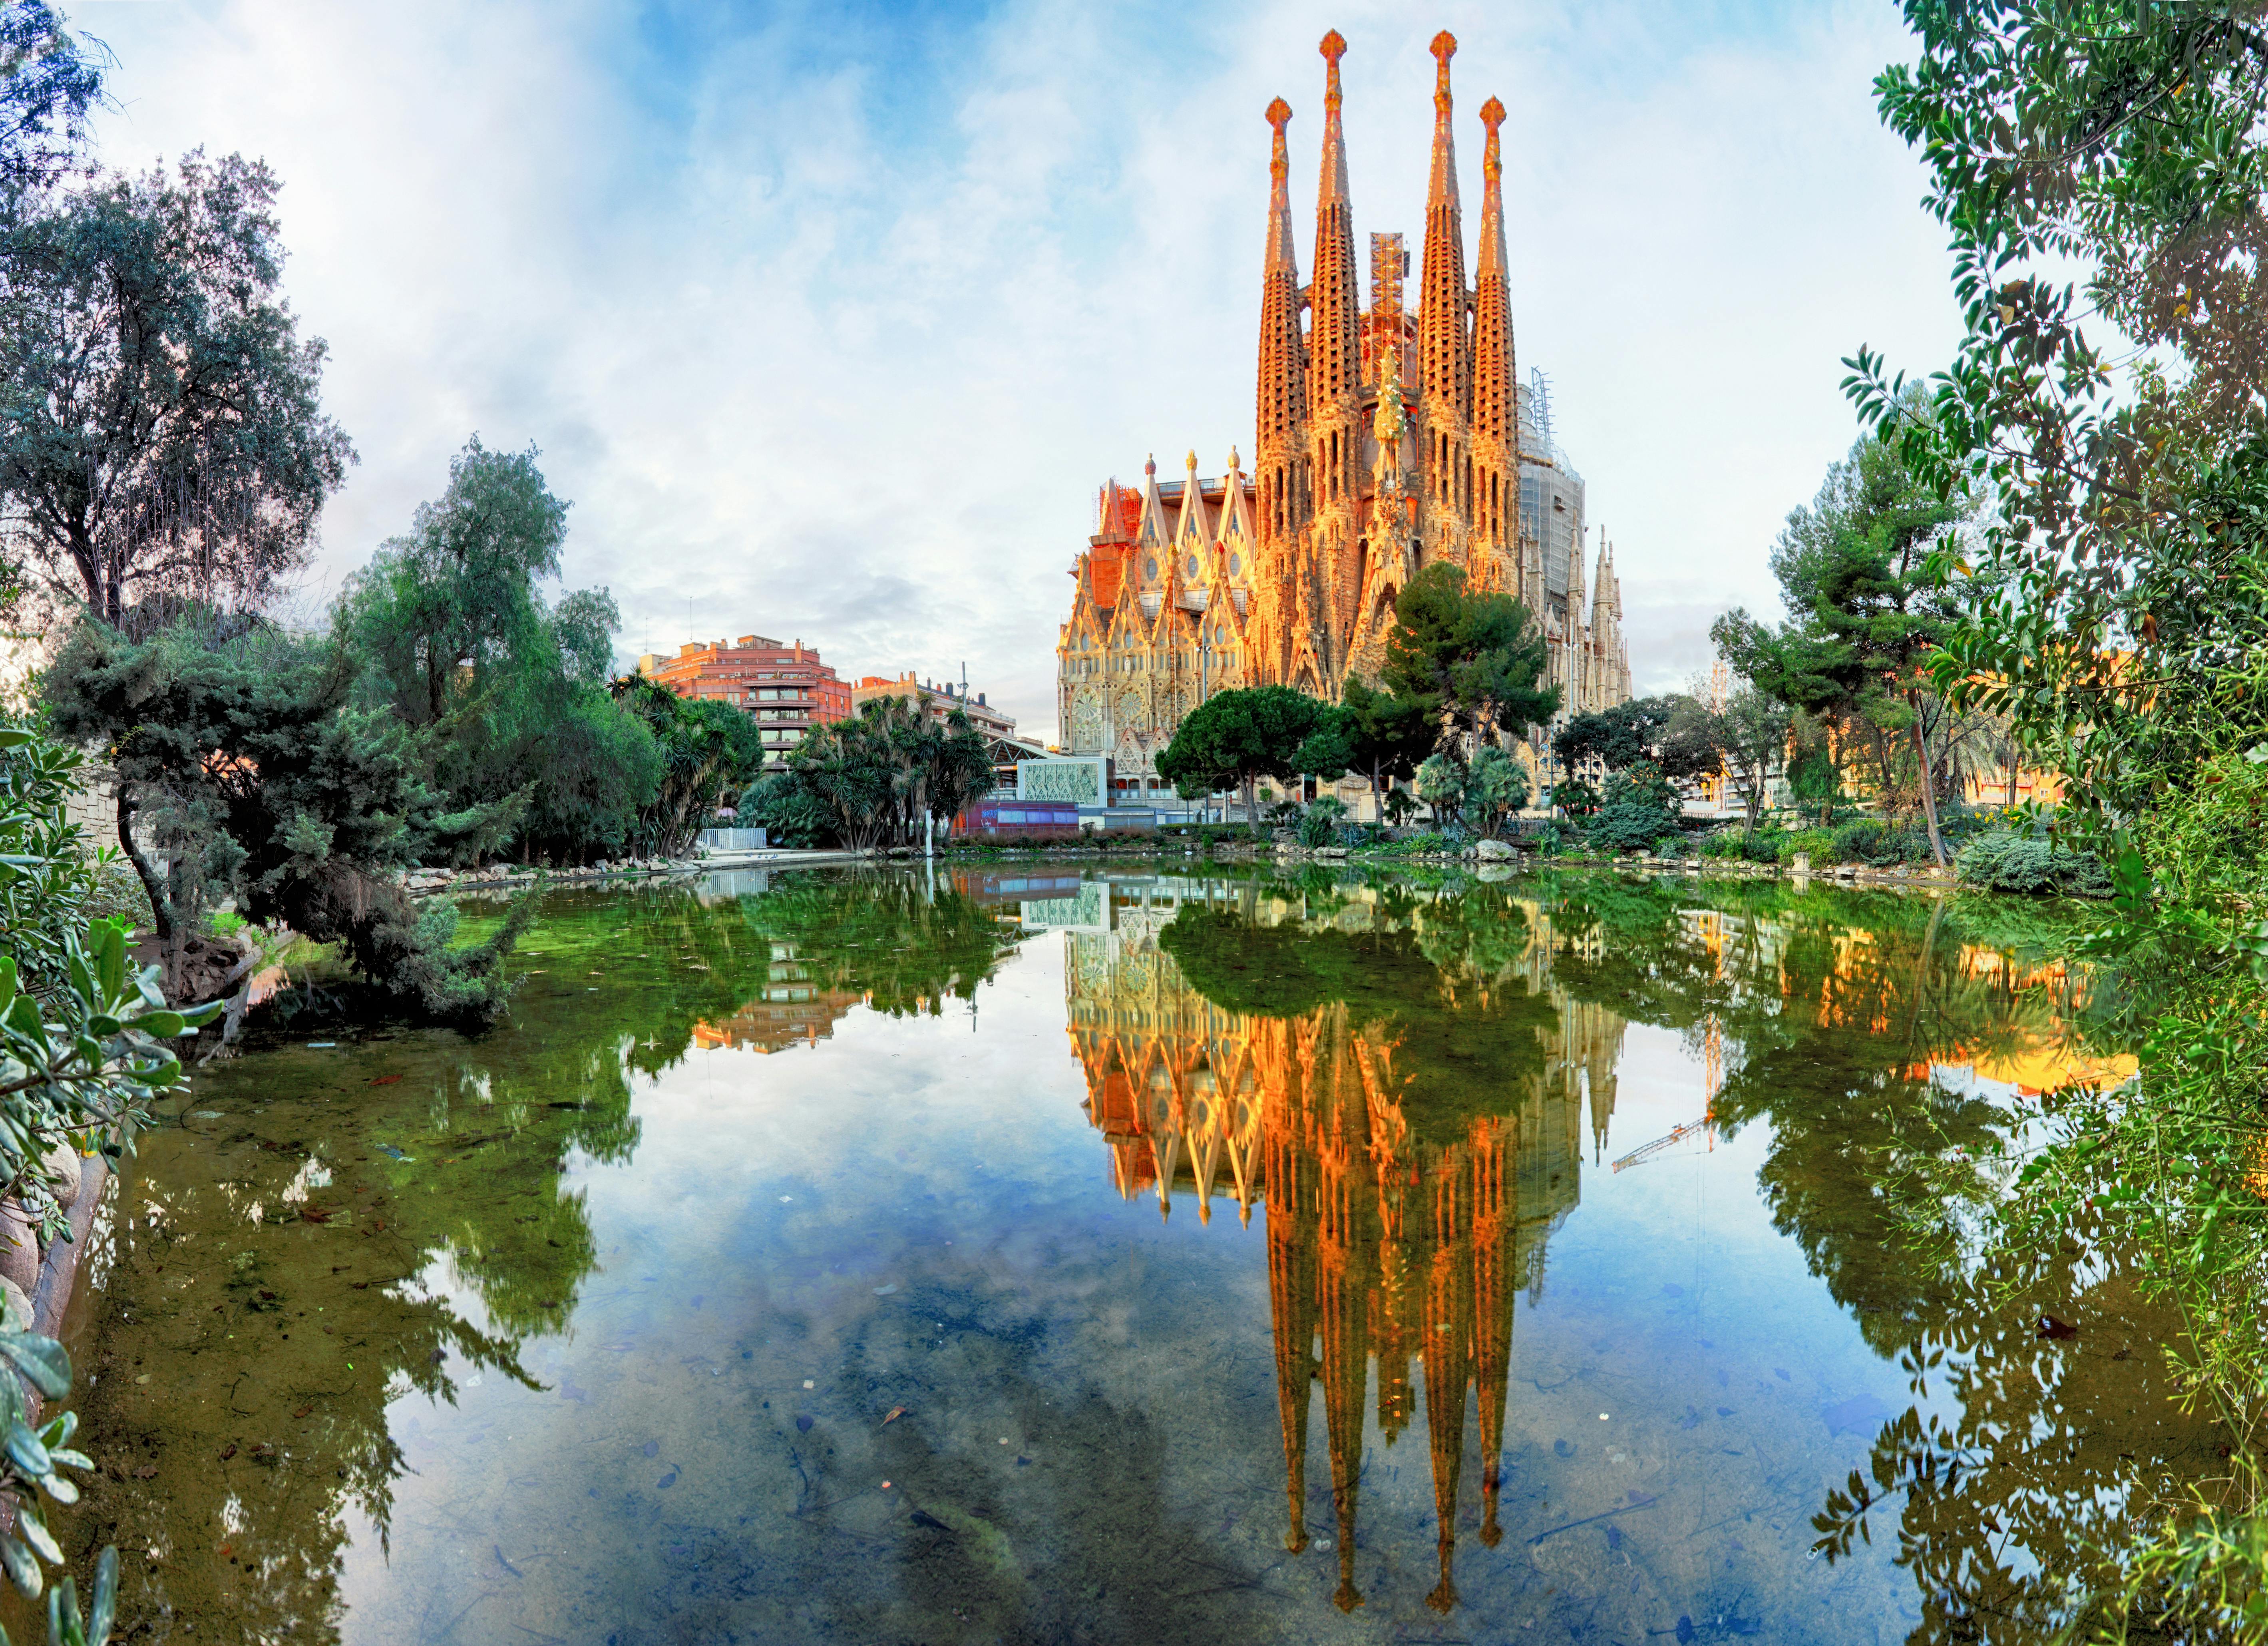 Barcelona tour with skip-the-line at Sagrada Familia and pick-up Musement